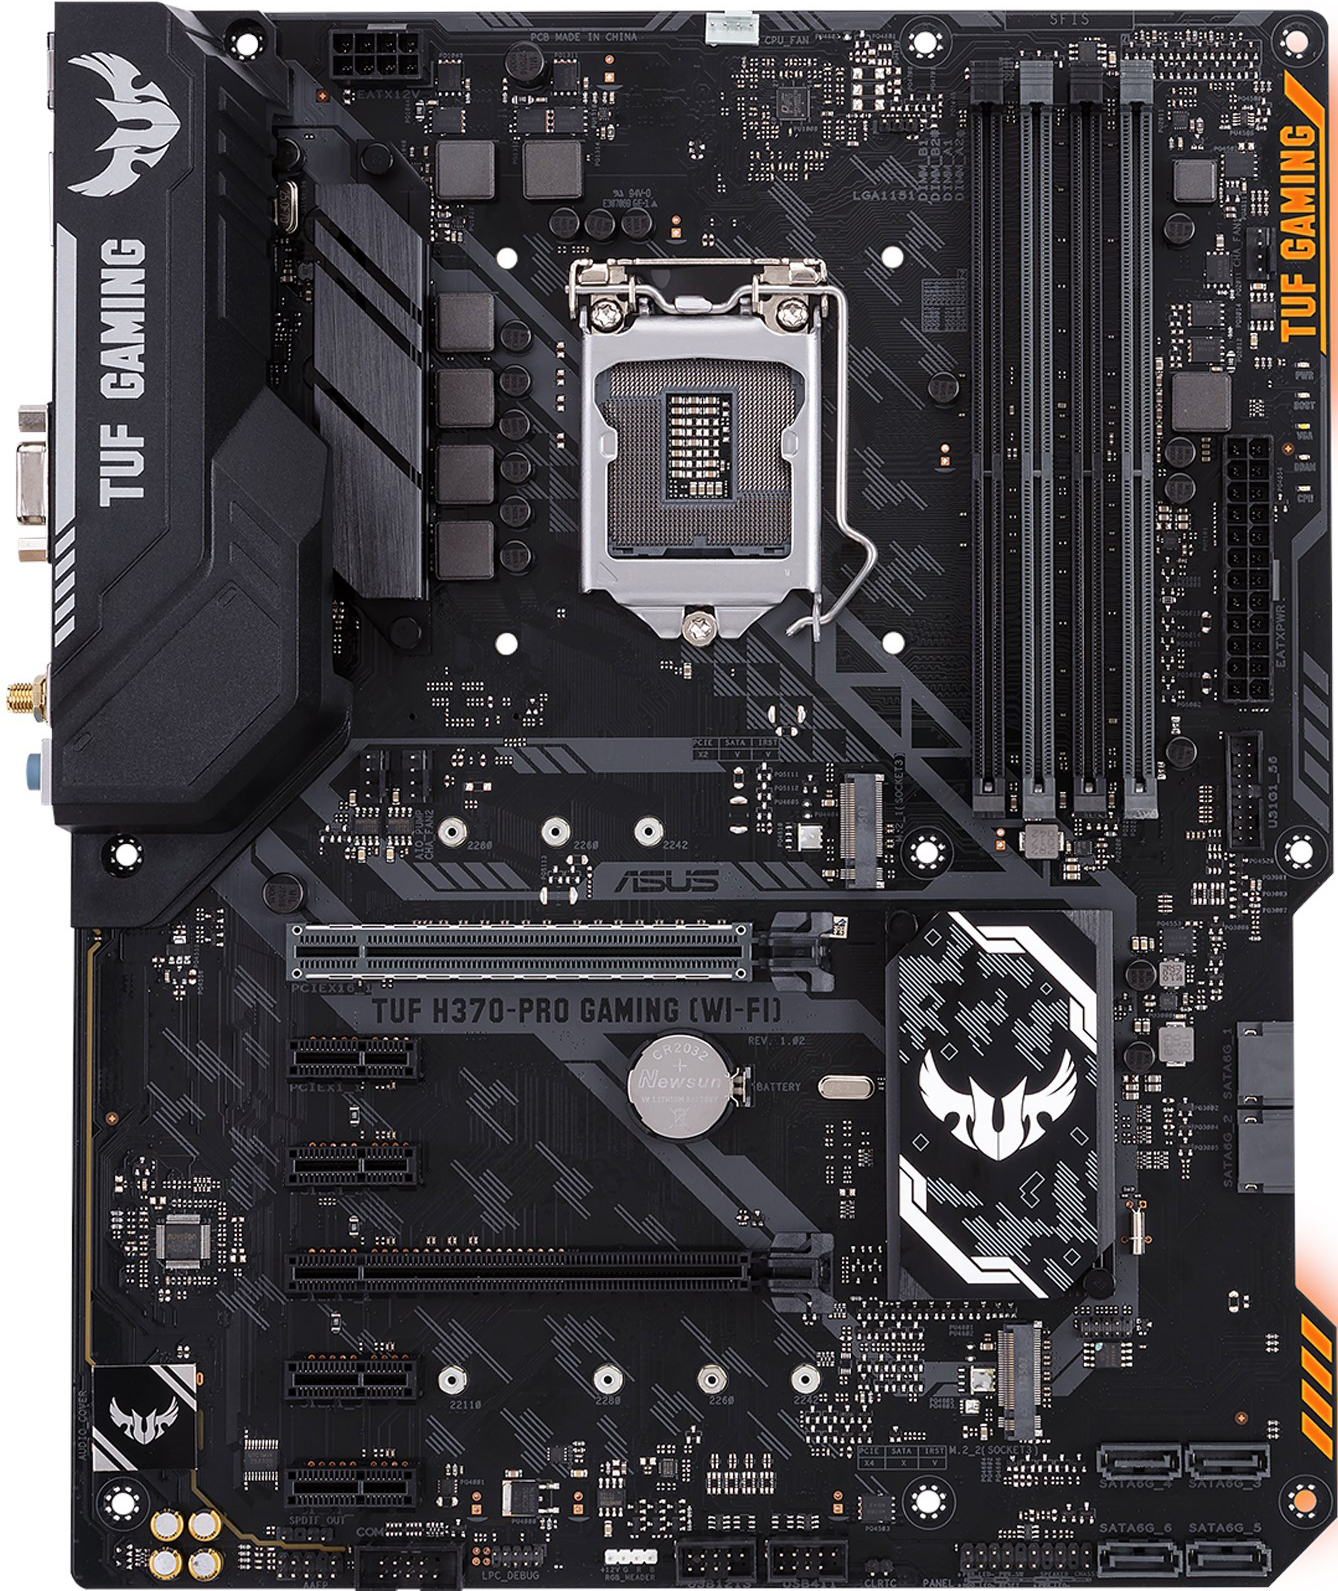 Asus TUF H370-Pro Gaming (Wi-Fi) - Motherboard Specifications On  MotherboardDB